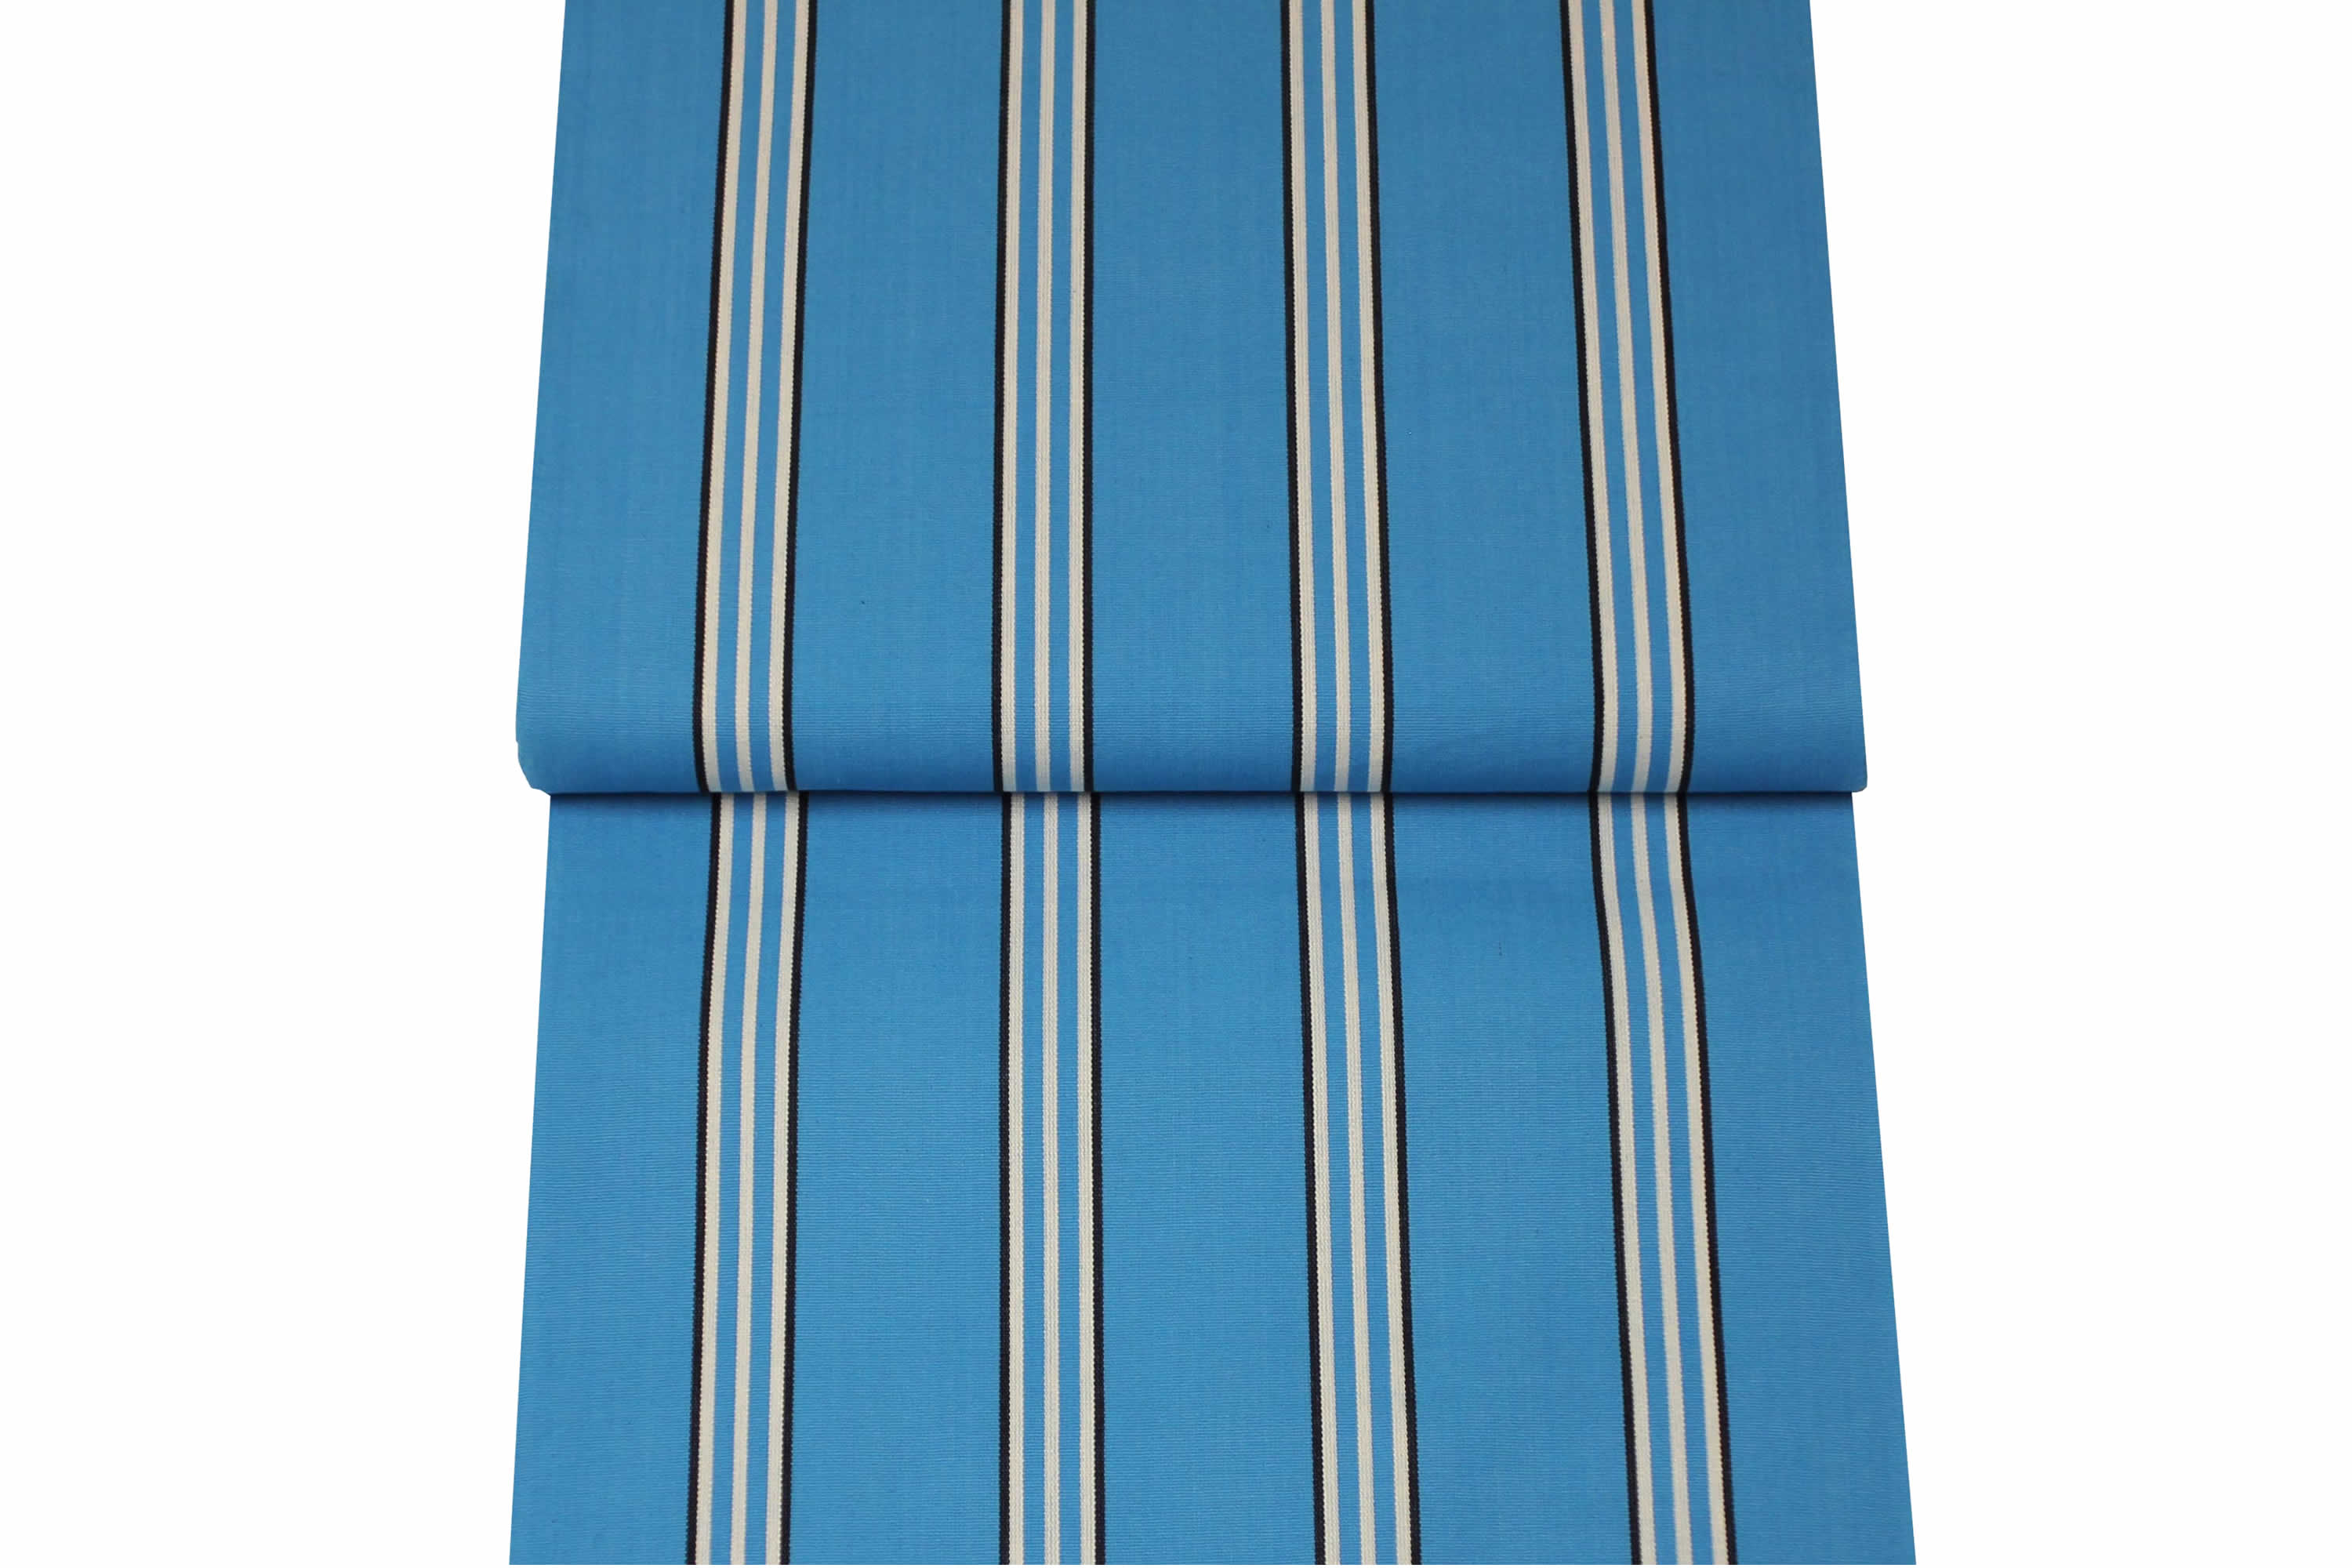 Turquoise Striped Deckchair Canvas Fabric - Thicker Weave turquoise, white, black  